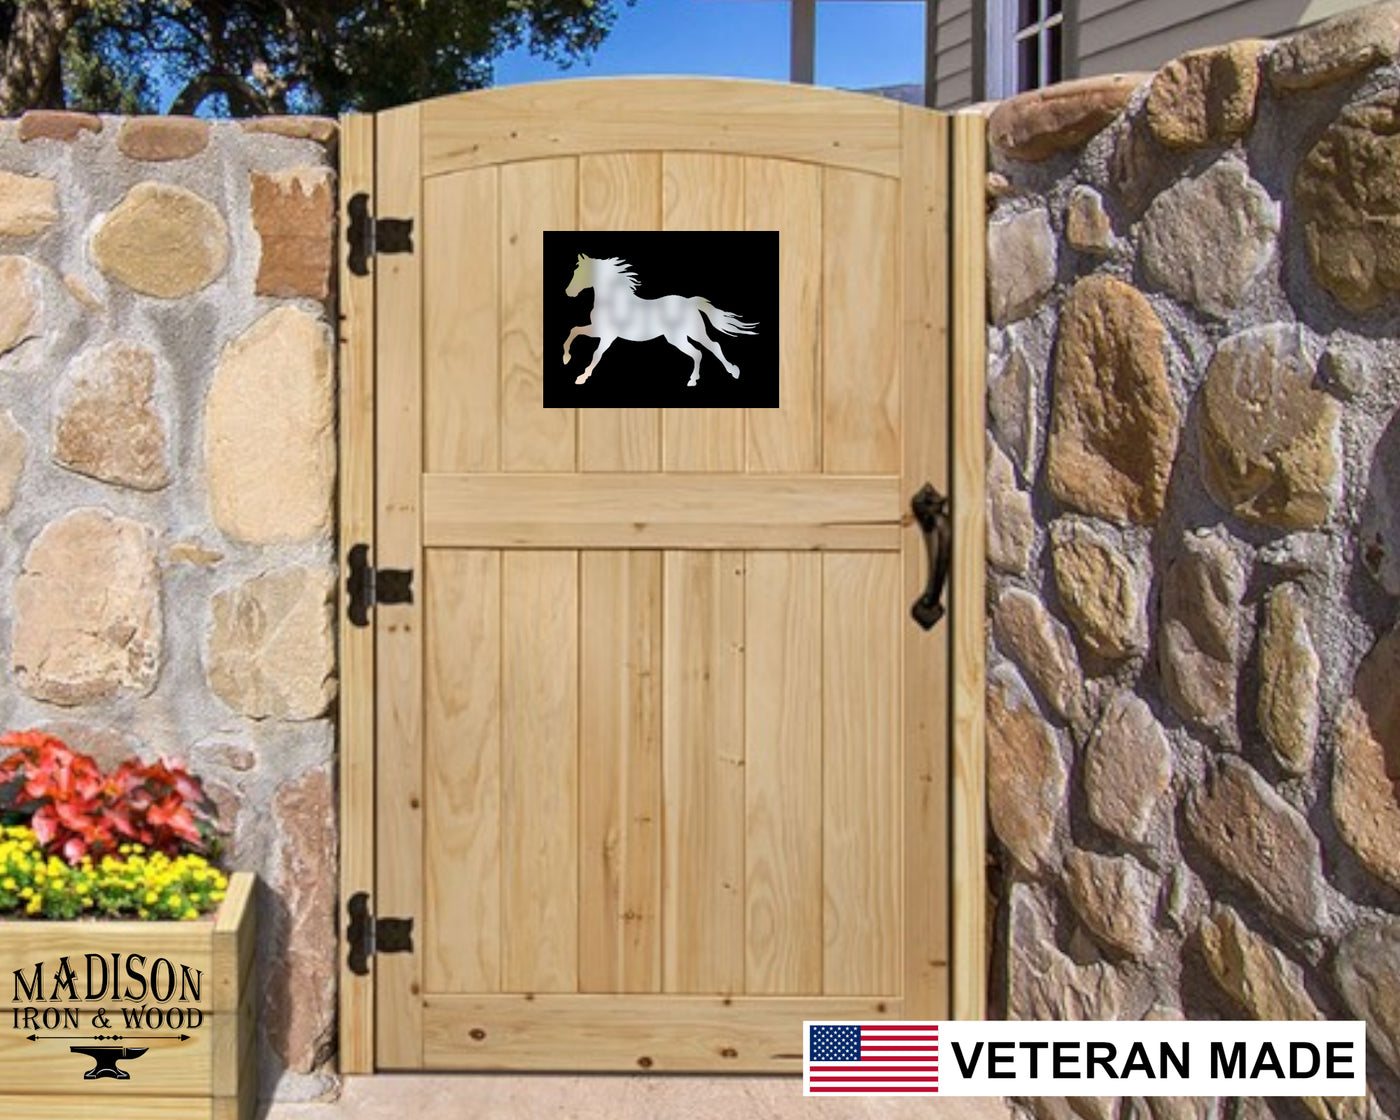 Horse Gate Window Insert - Madison Iron and Wood - Gate Window - metal outdoor decor - Steel deocrations - american made products - veteran owned business products - fencing decorations - fencing supplies - custom wall decorations - personalized wall signs - steel - decorative post caps - steel post caps - metal post caps - brackets - structural brackets - home improvement - easter - easter decorations - easter gift - easter yard decor